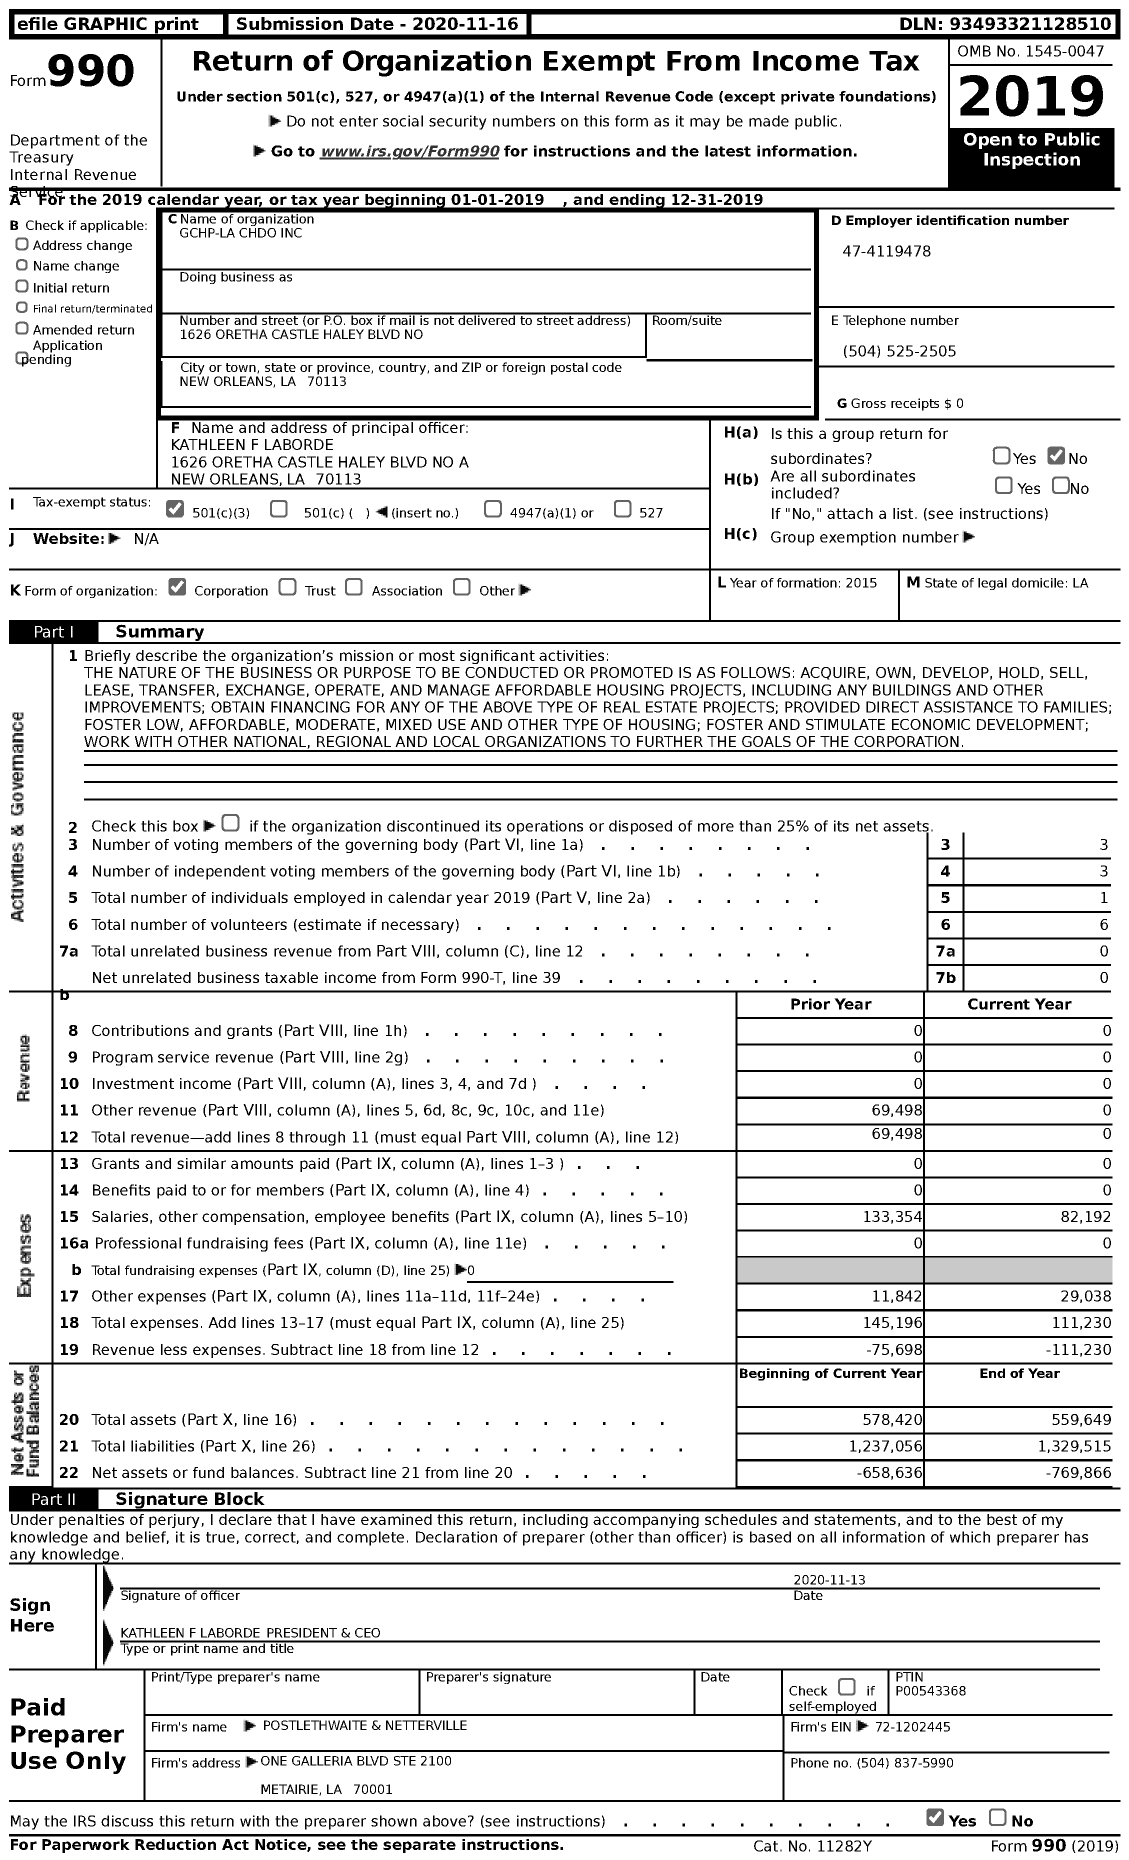 Image of first page of 2019 Form 990 for Gchp-La Chdo